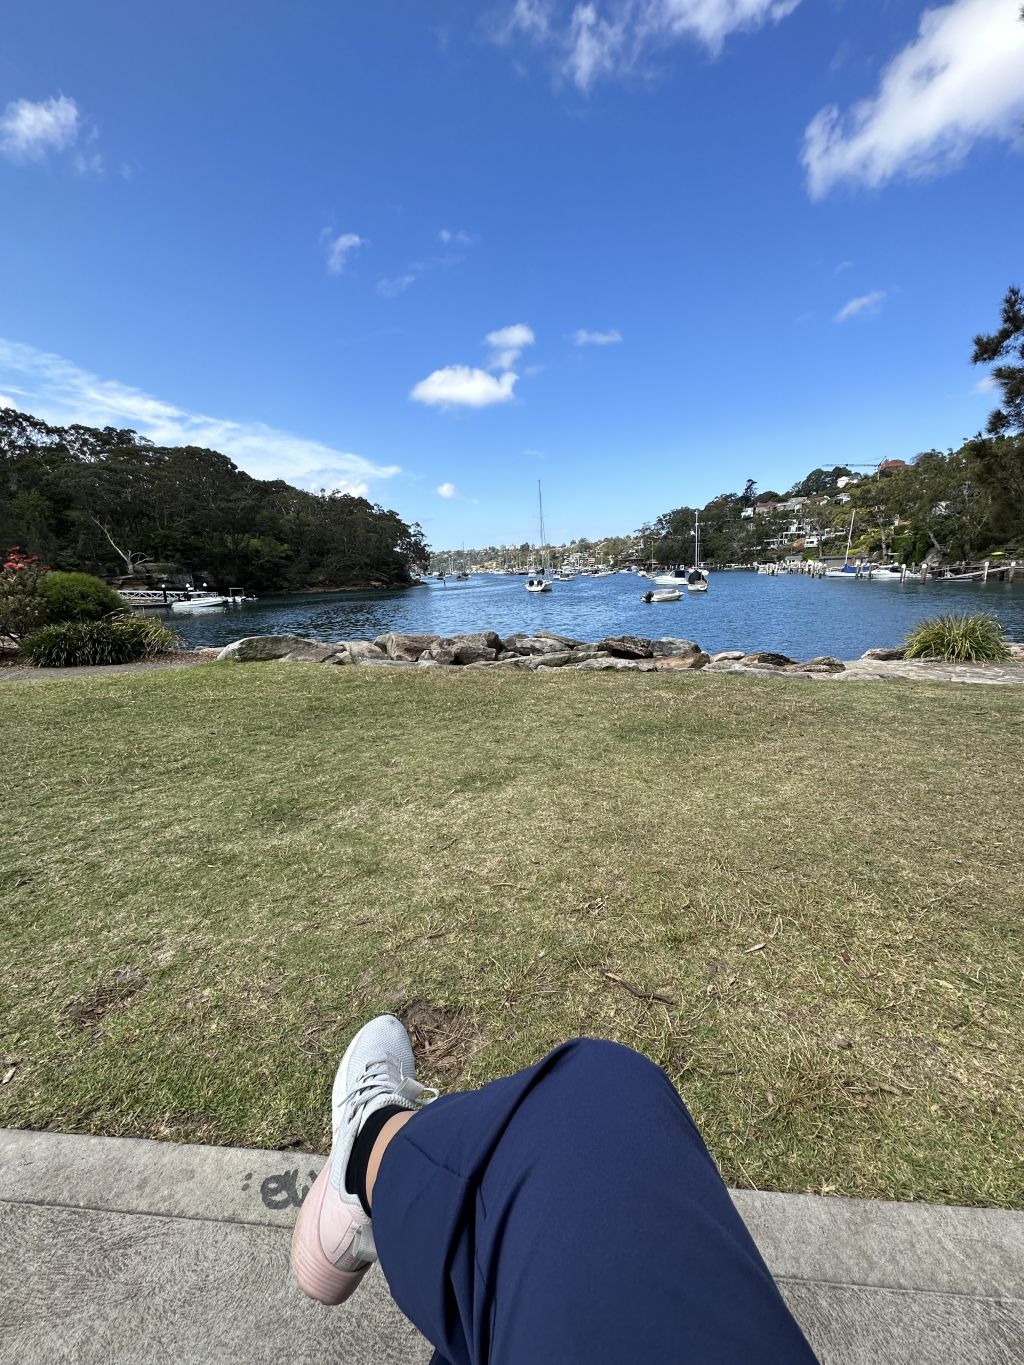 Mortlock Reserve in Northbridge is one of the couple's favourite places to unwind. Photo: Supplied